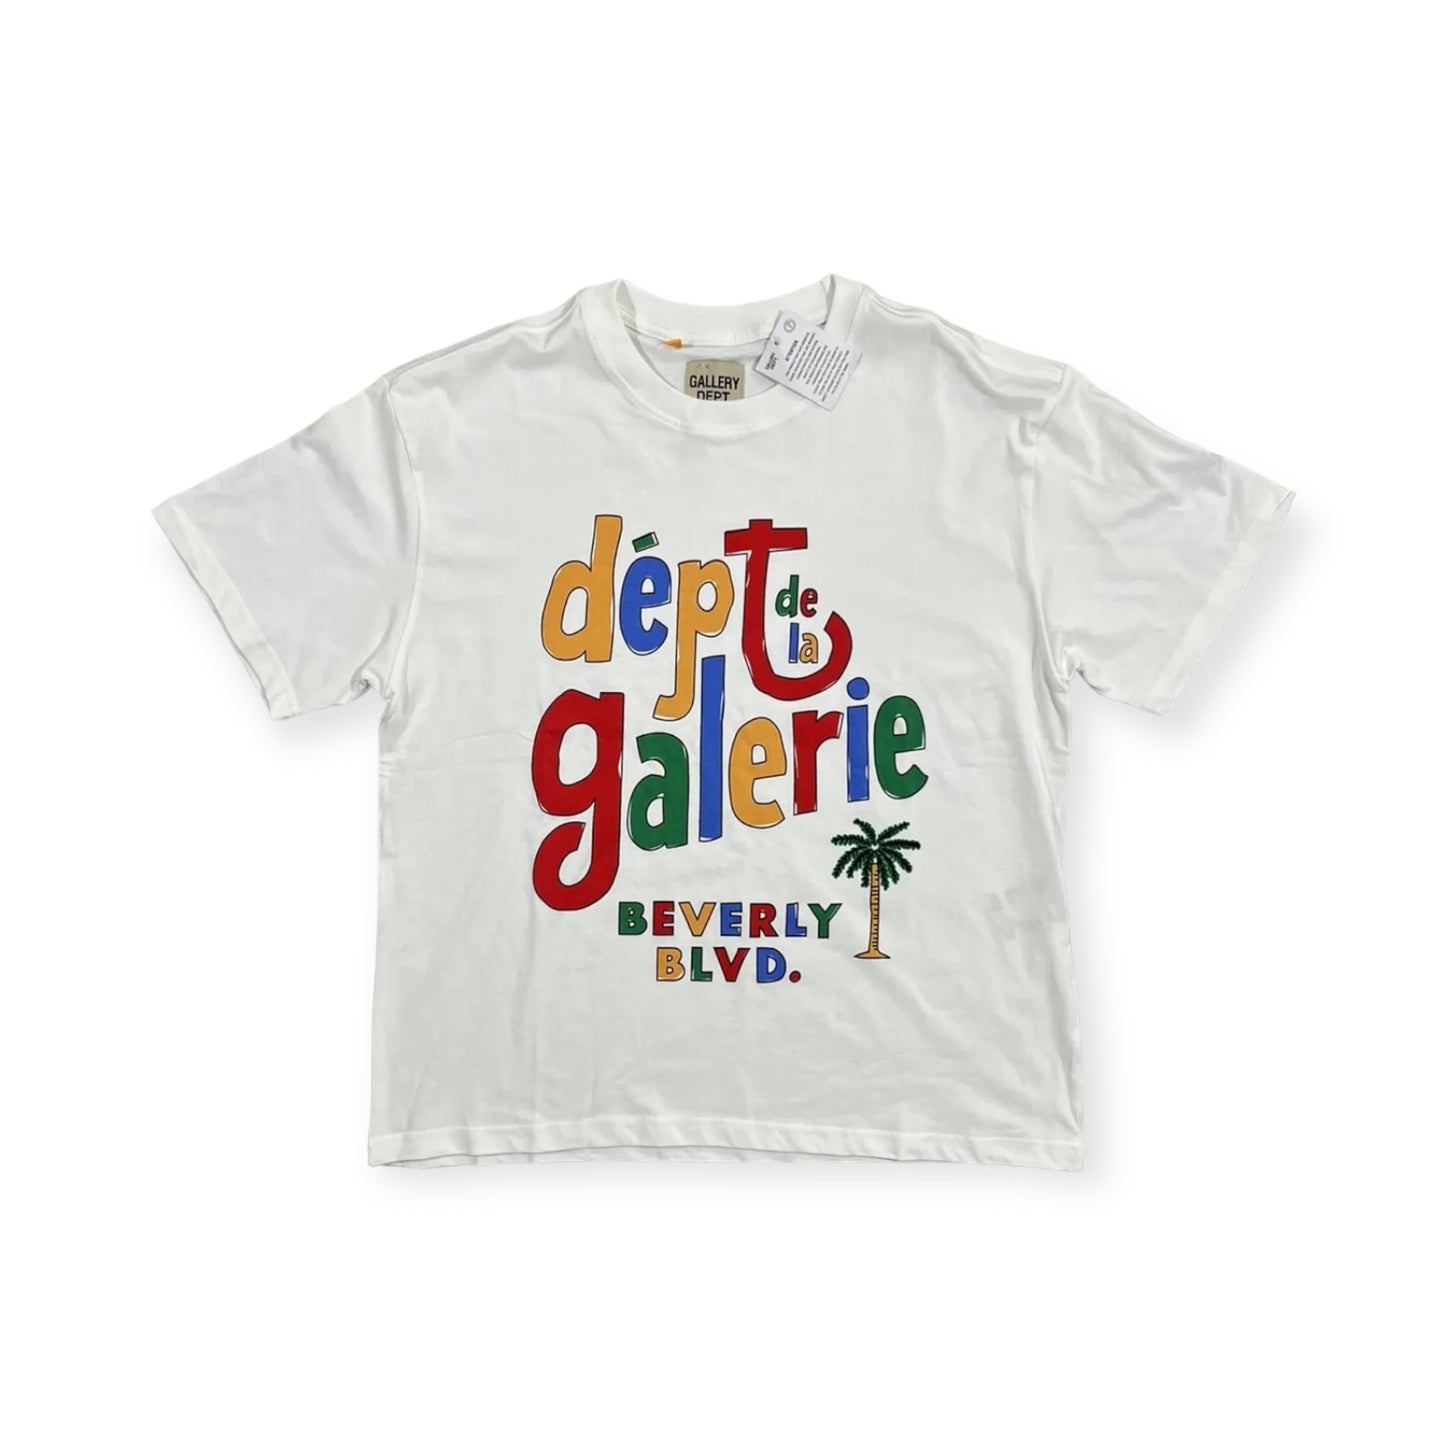 Brand New Gallery Dept Tee Size M